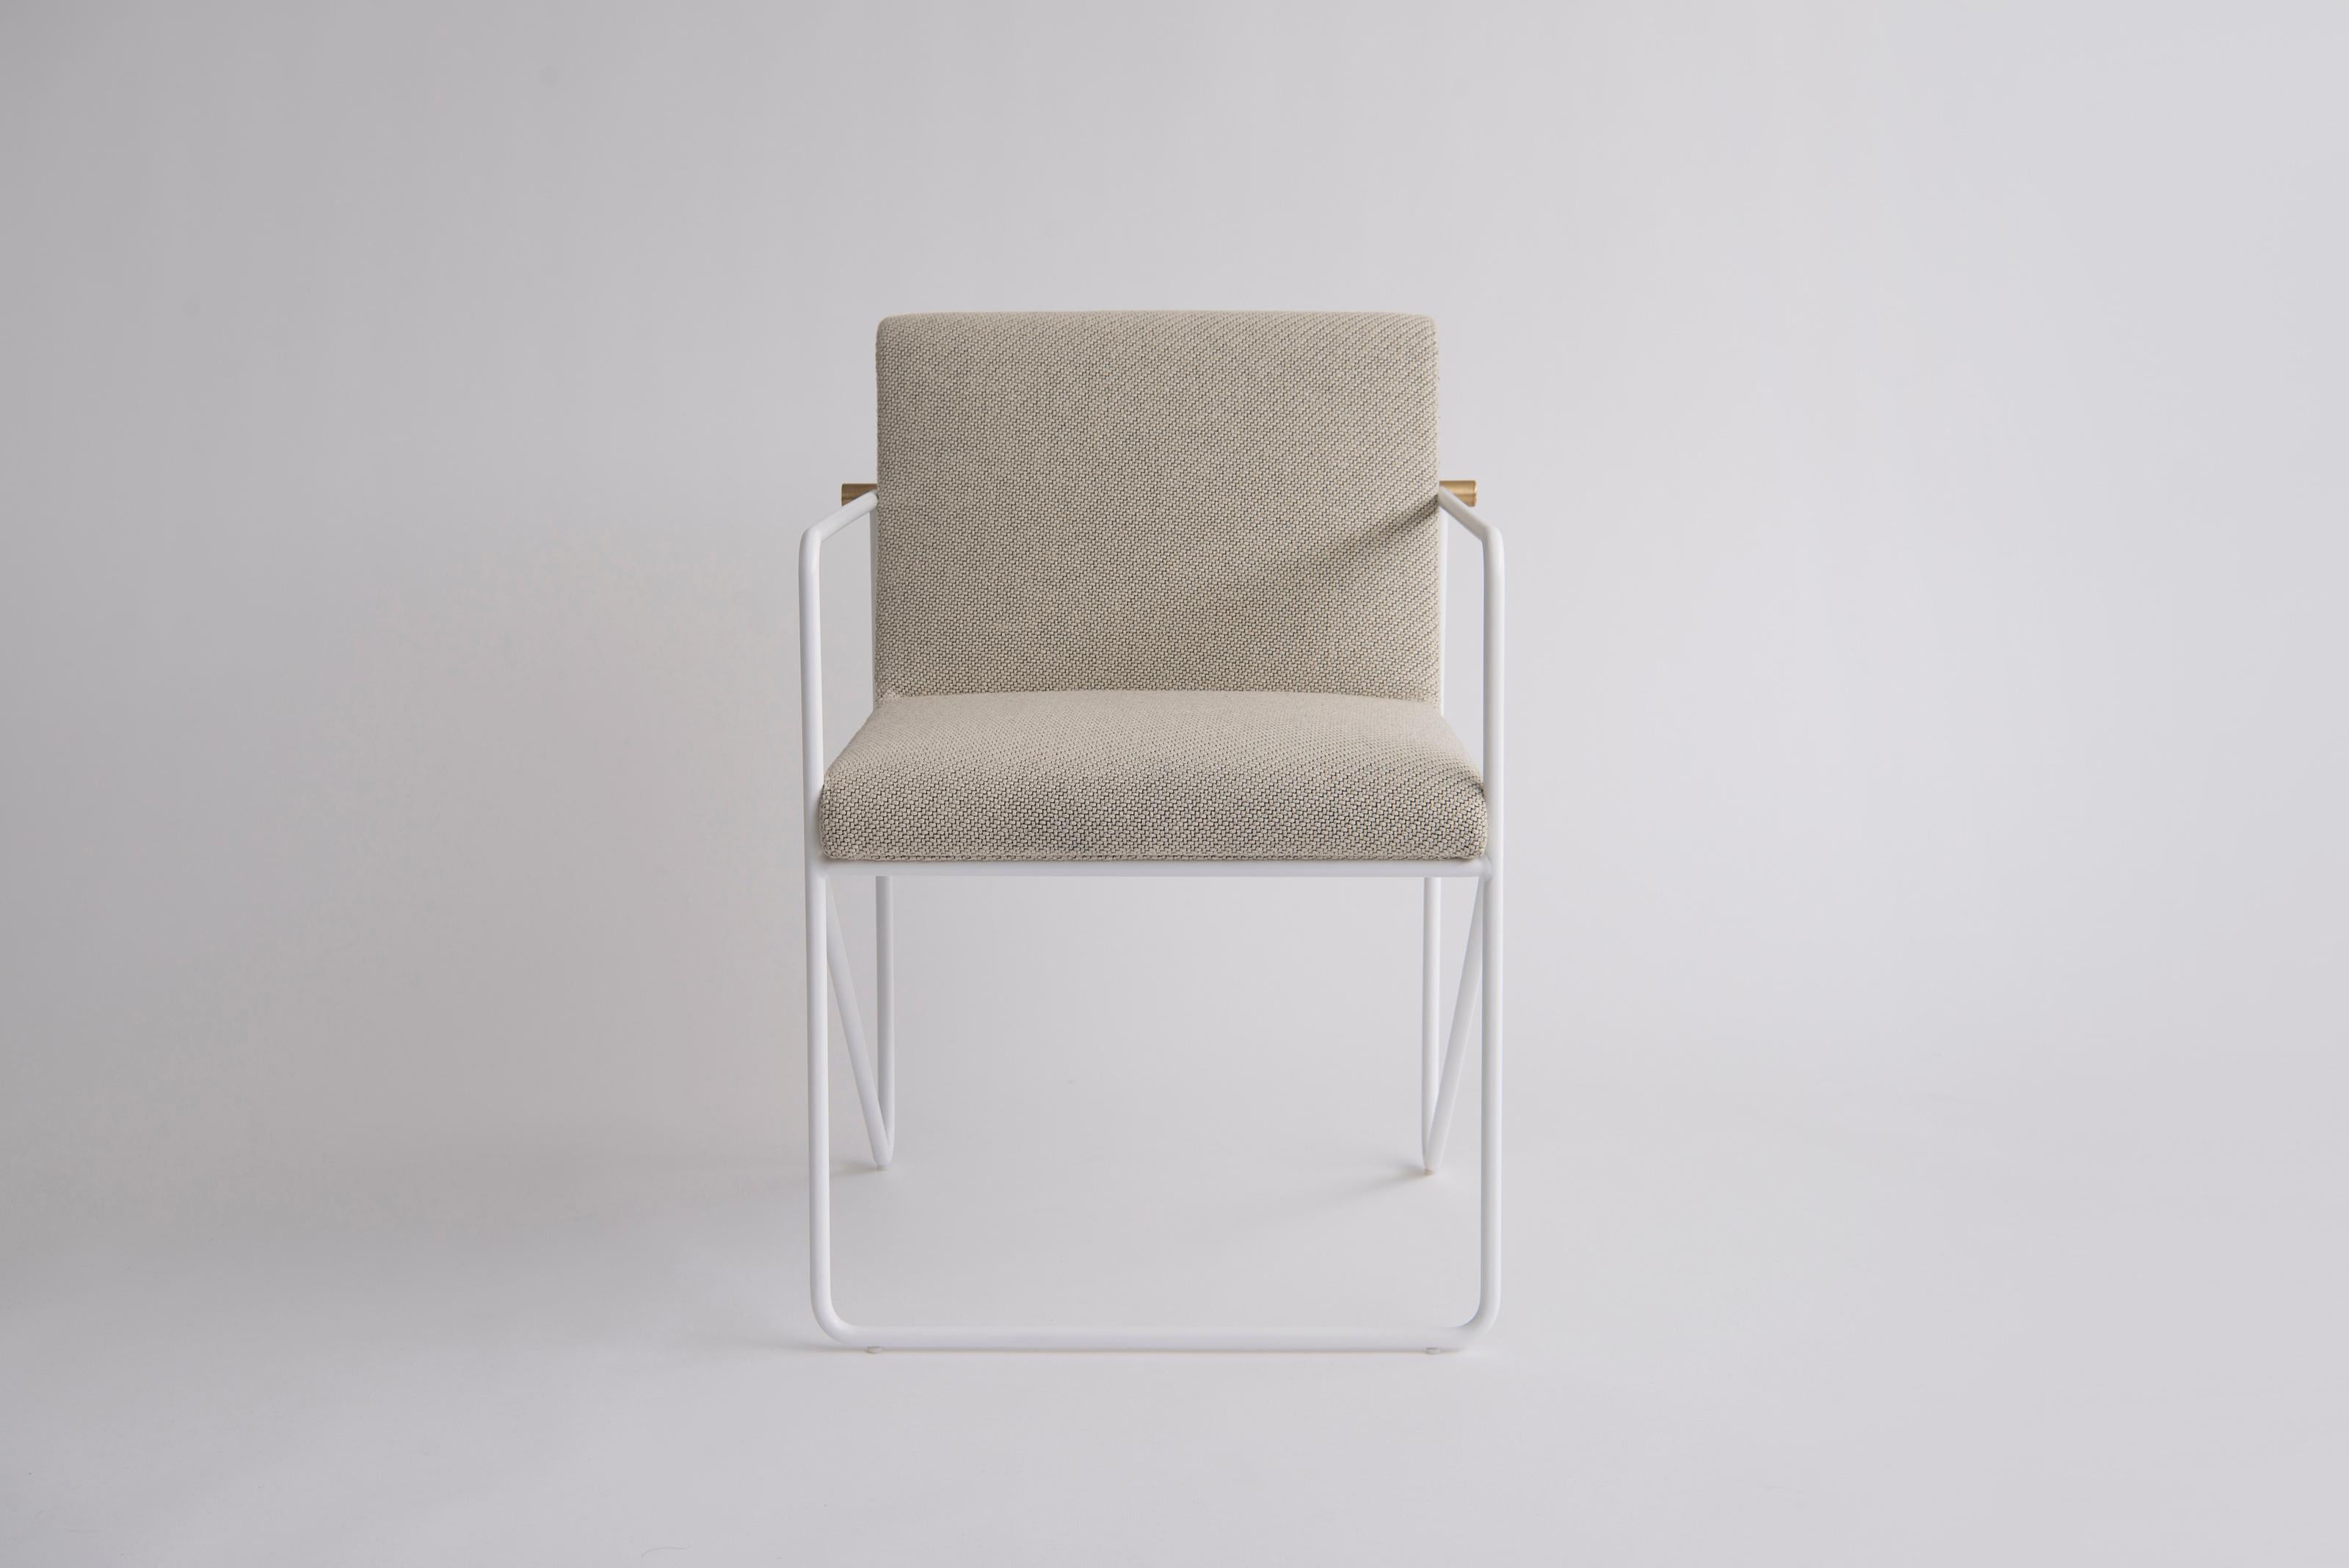 Kickstand Side Chair With Arms by Phase Design
Dimensions: D 63.5 x W 59.1 x H 79.4 cm. 
Materials: Upholstery, powder-coated metal and brushed brass.

Solid steel bar available in a flat black or white powder coat finish with solid brushed brass